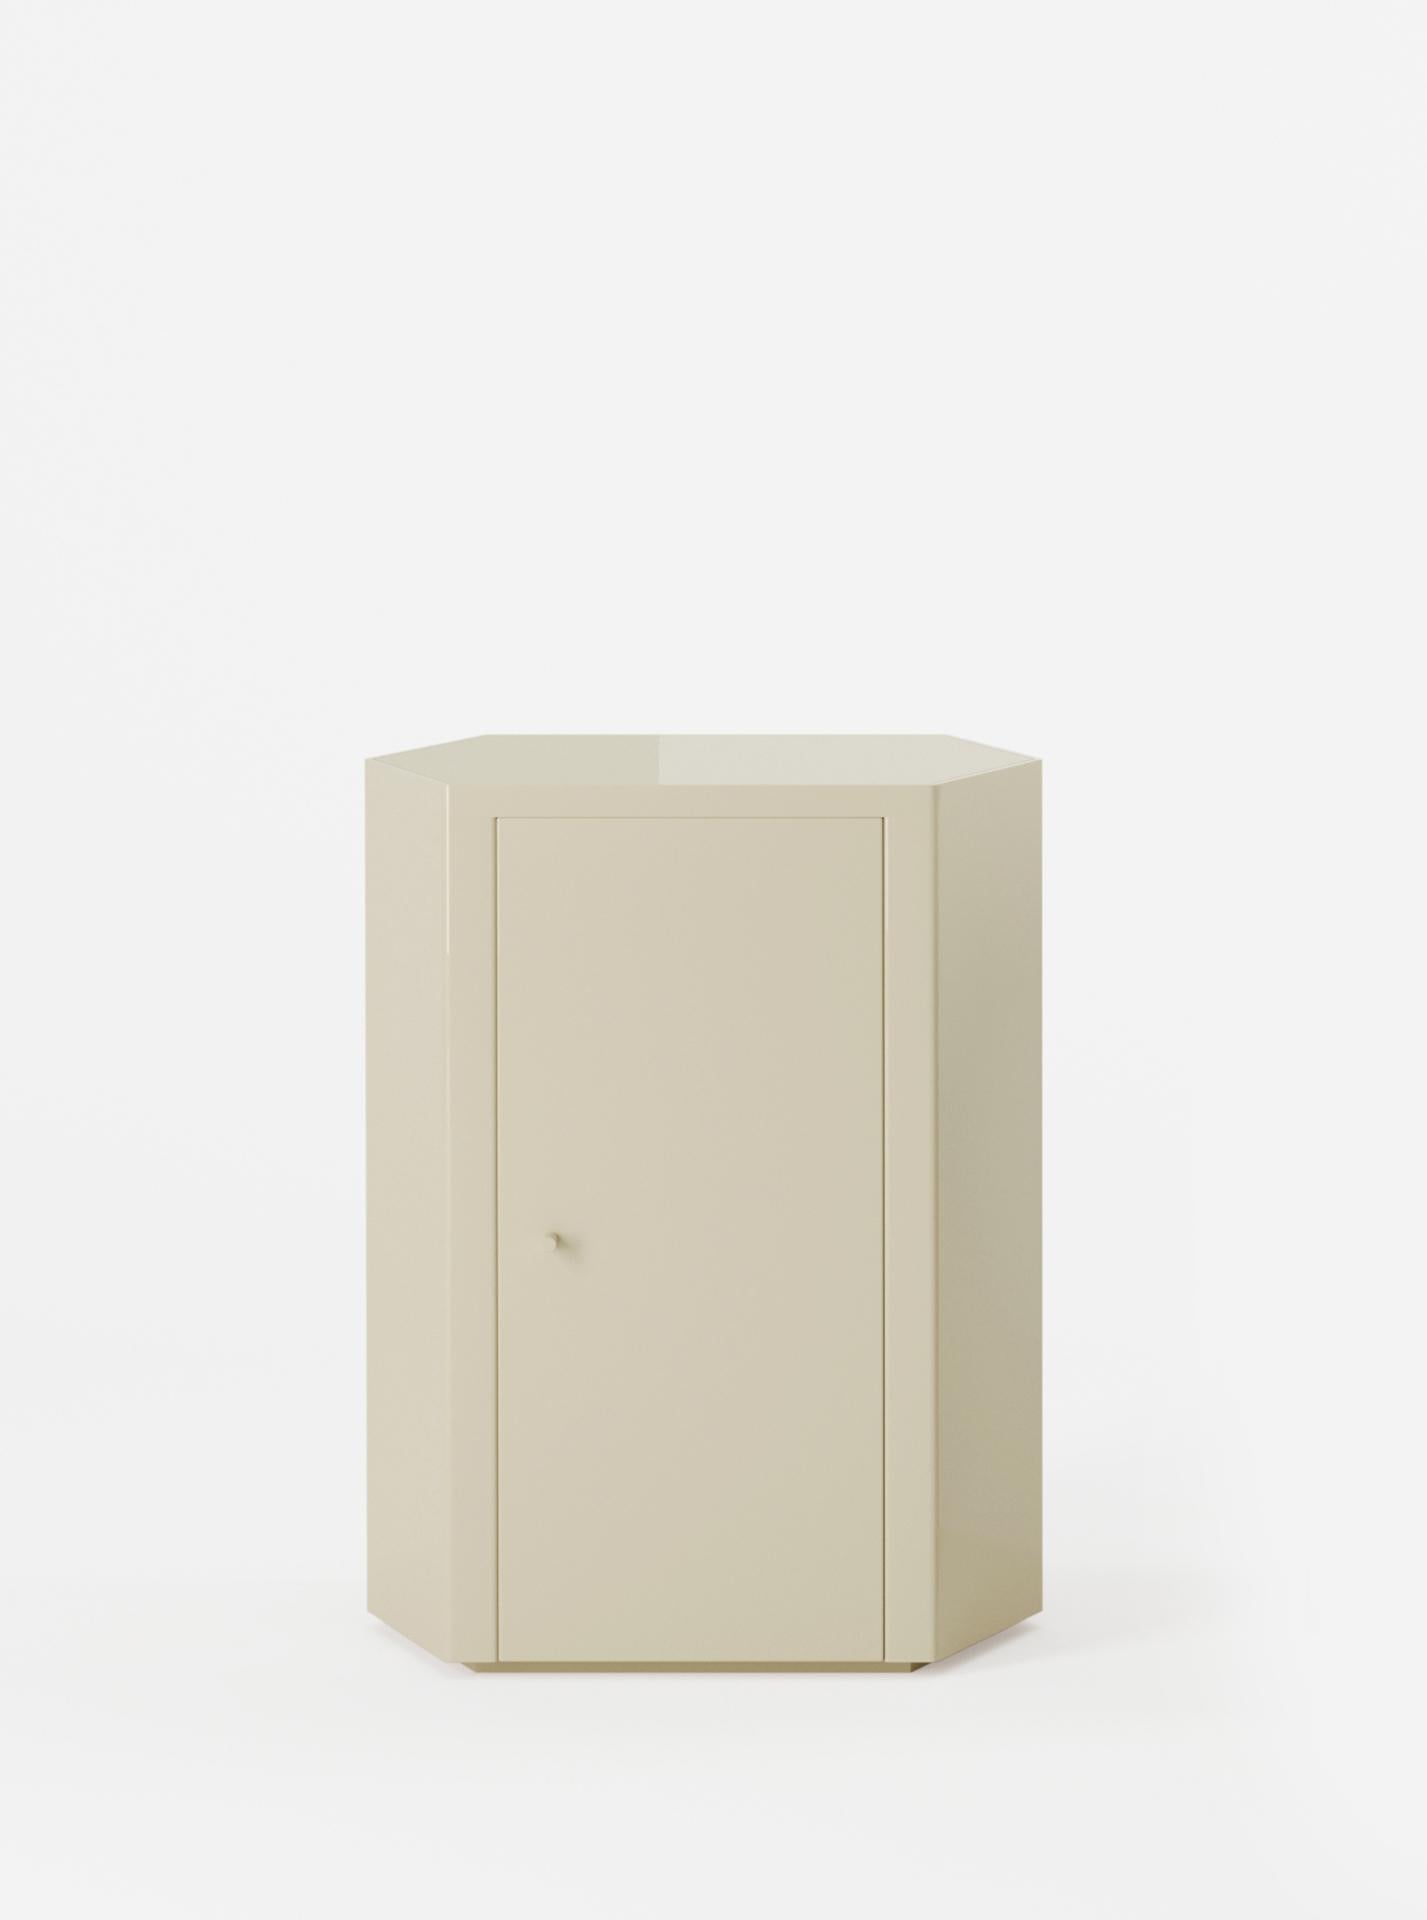 Minimalist Pair of Park Night Stands in Butter Cream Lacquer by Yaniv Chen for Lemon For Sale